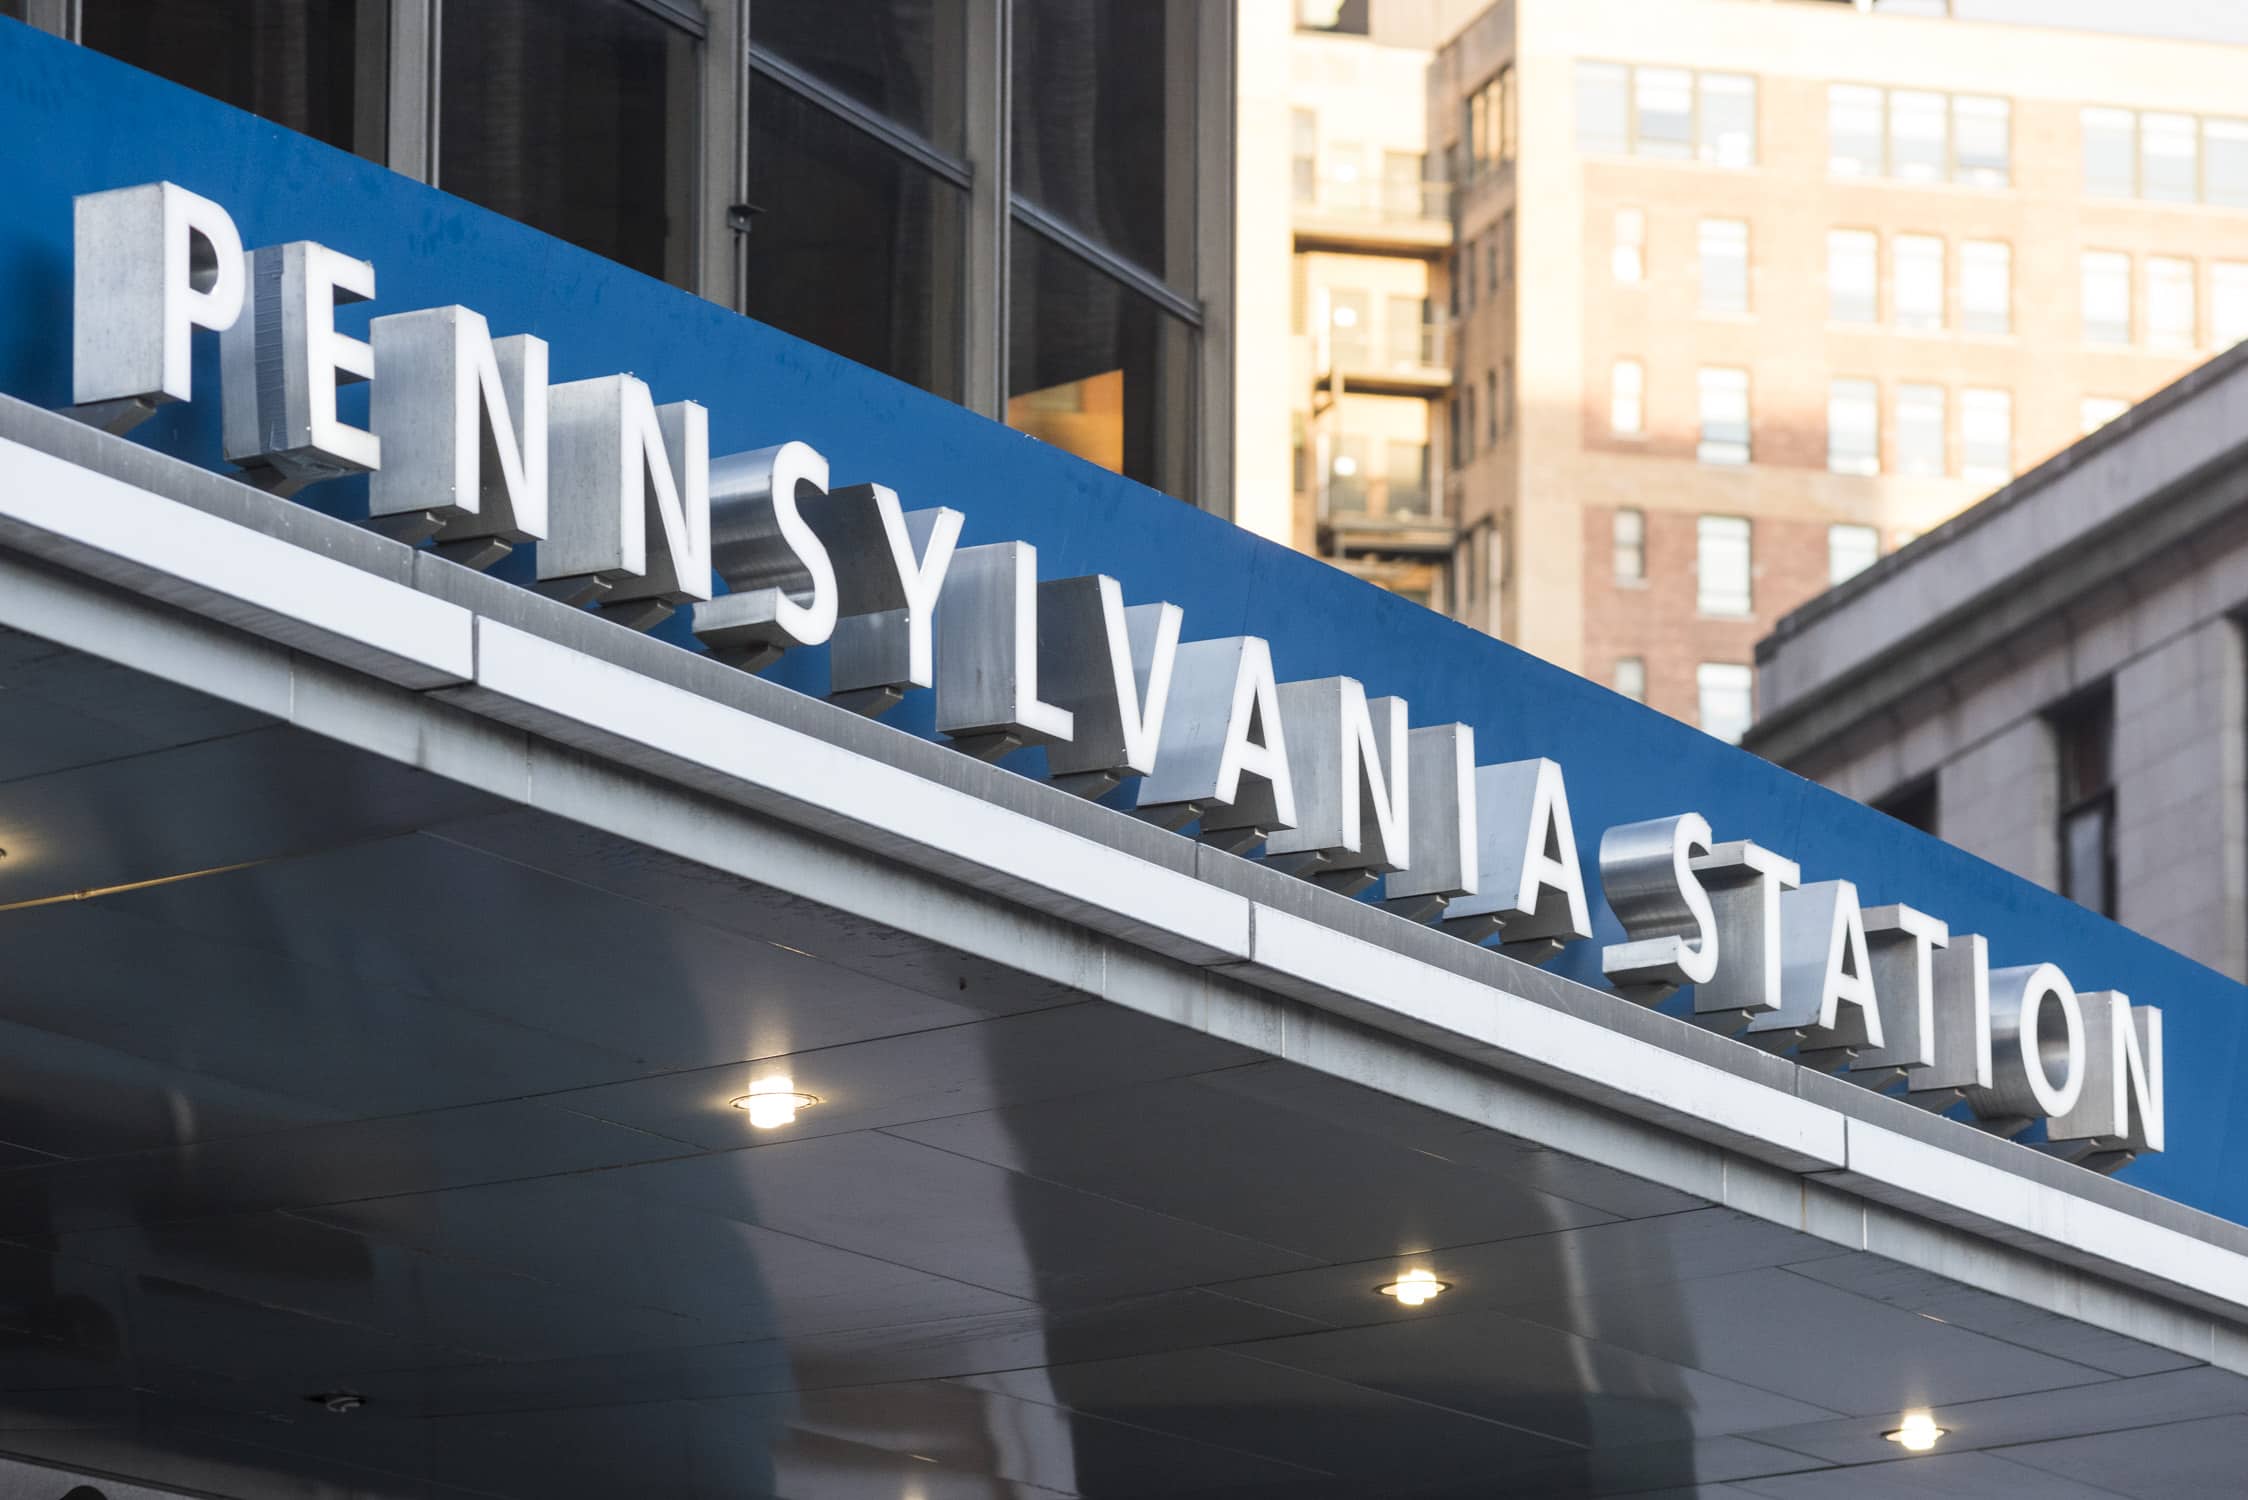 Building sign of "Pennsylvania Station"